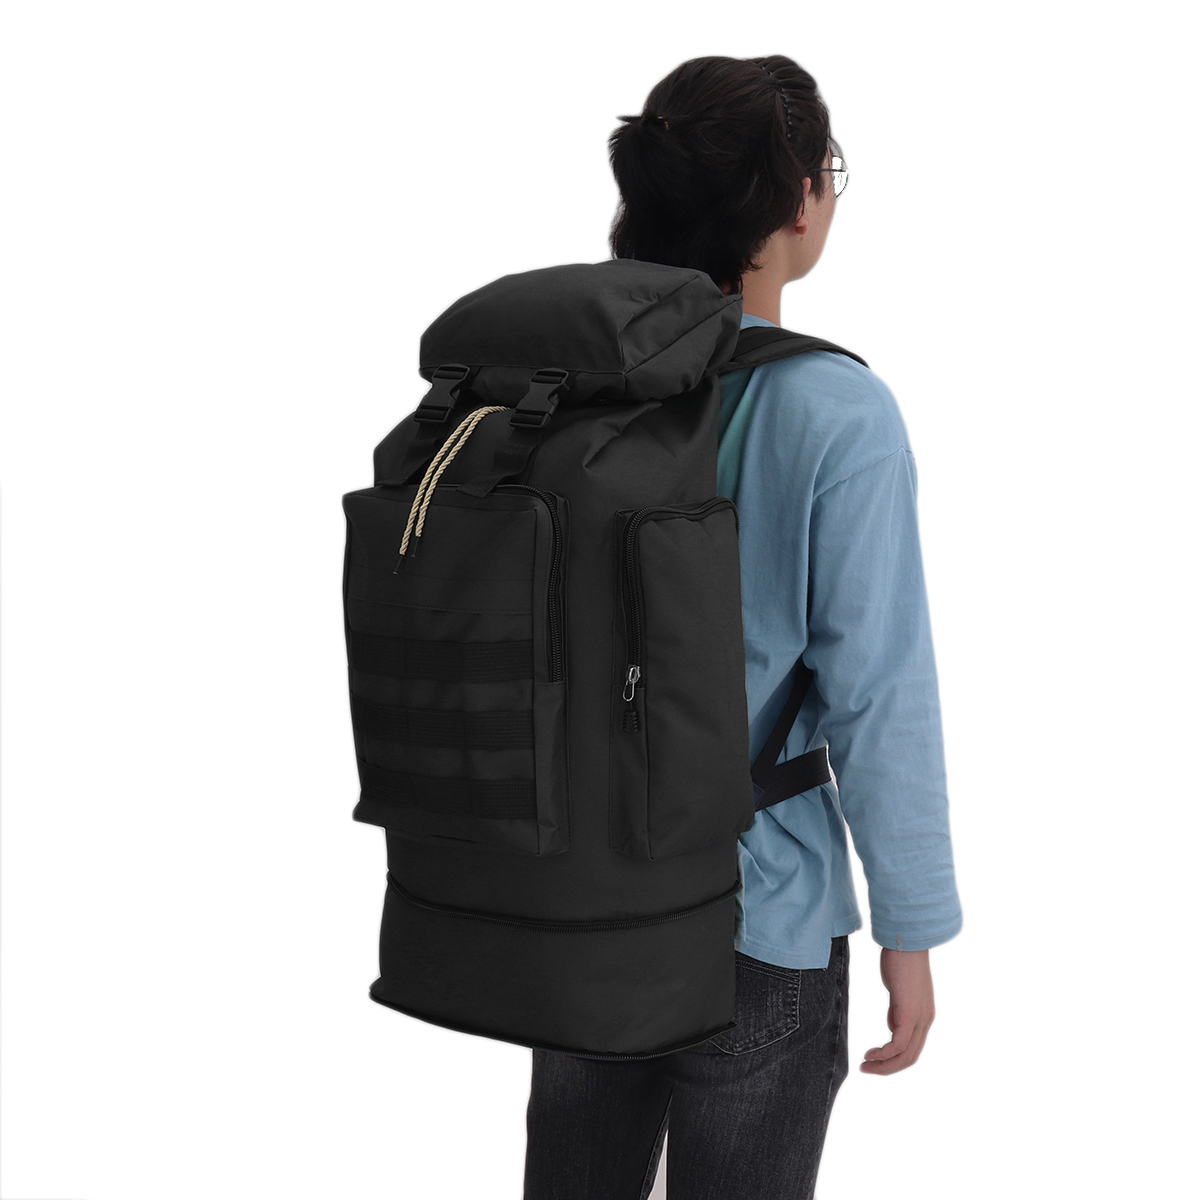 60L10L-Expanded-Large-Capacity-with-Mobile-Phone-Storage-Side-Bag-Outdoor-Hiking-Backpack-1869568-8